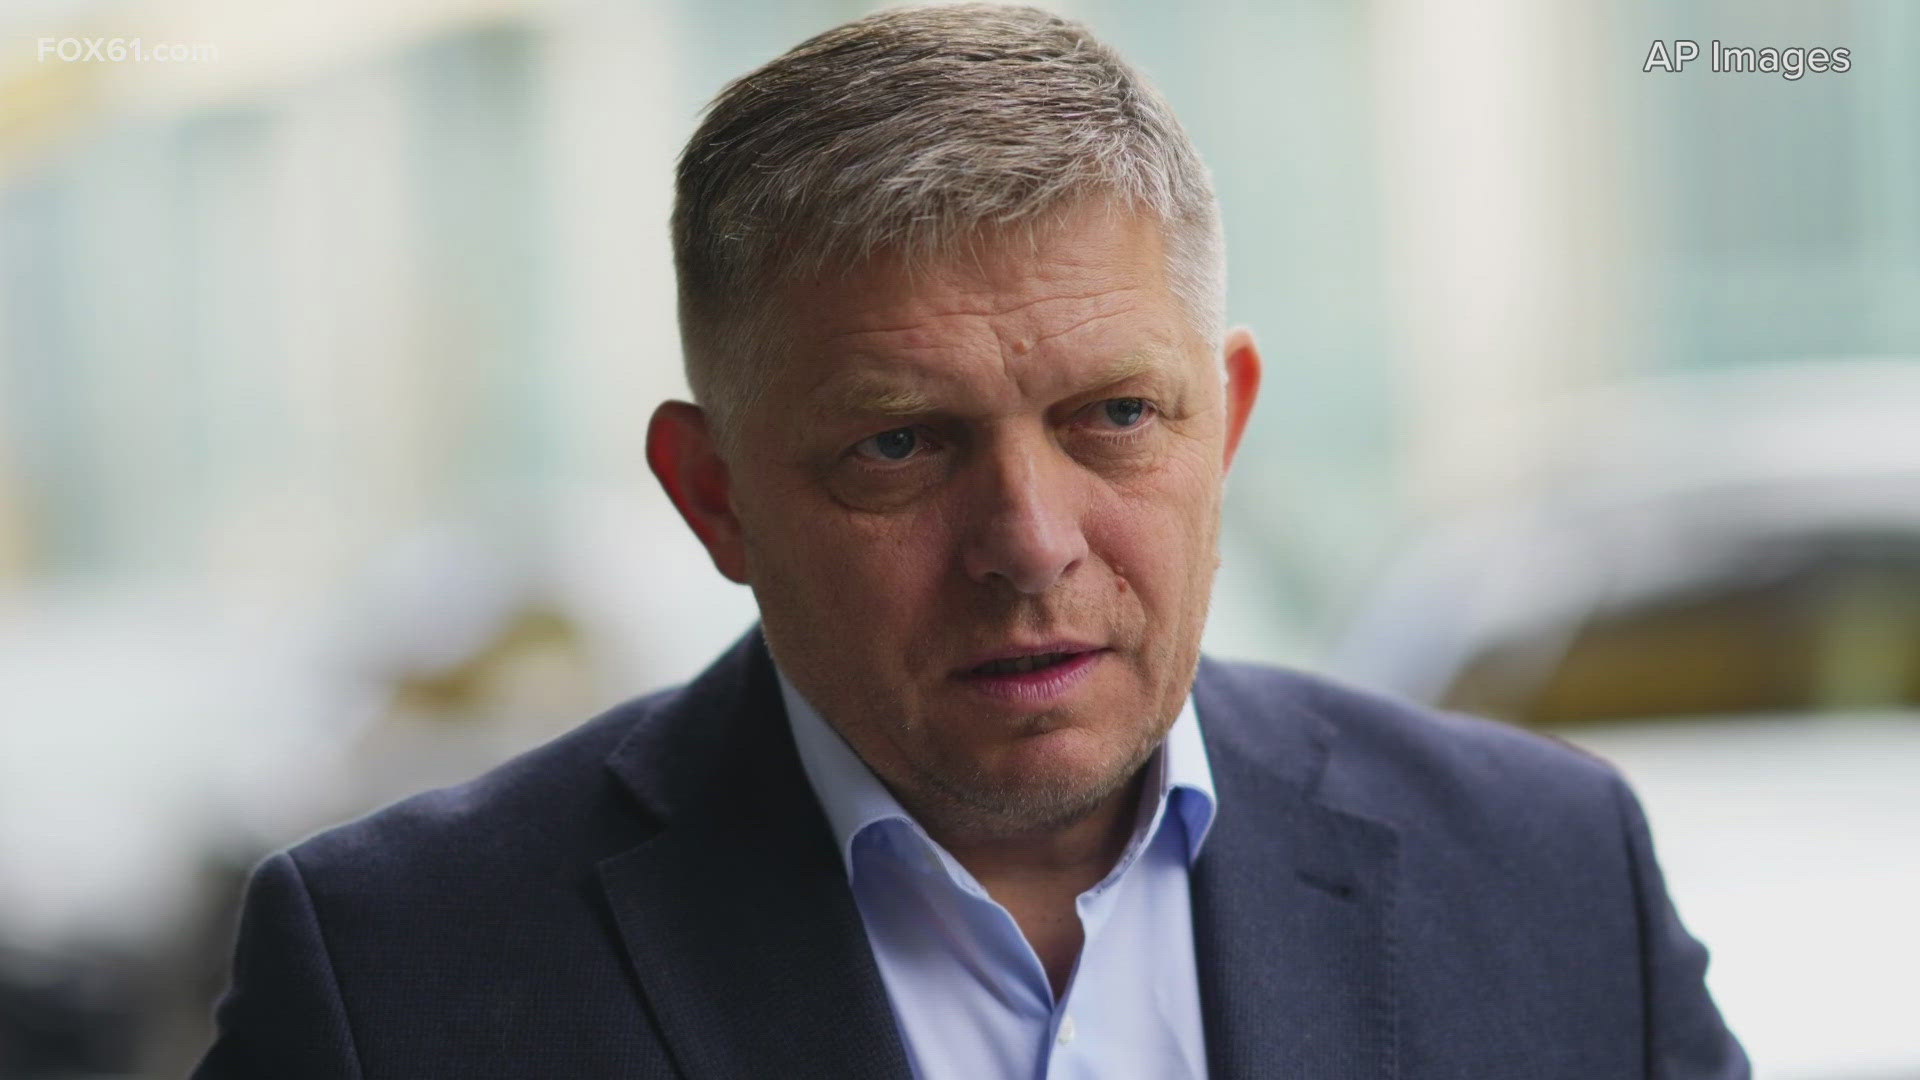 Slovakia Prime Minister Robert Fico was shot after a meeting.